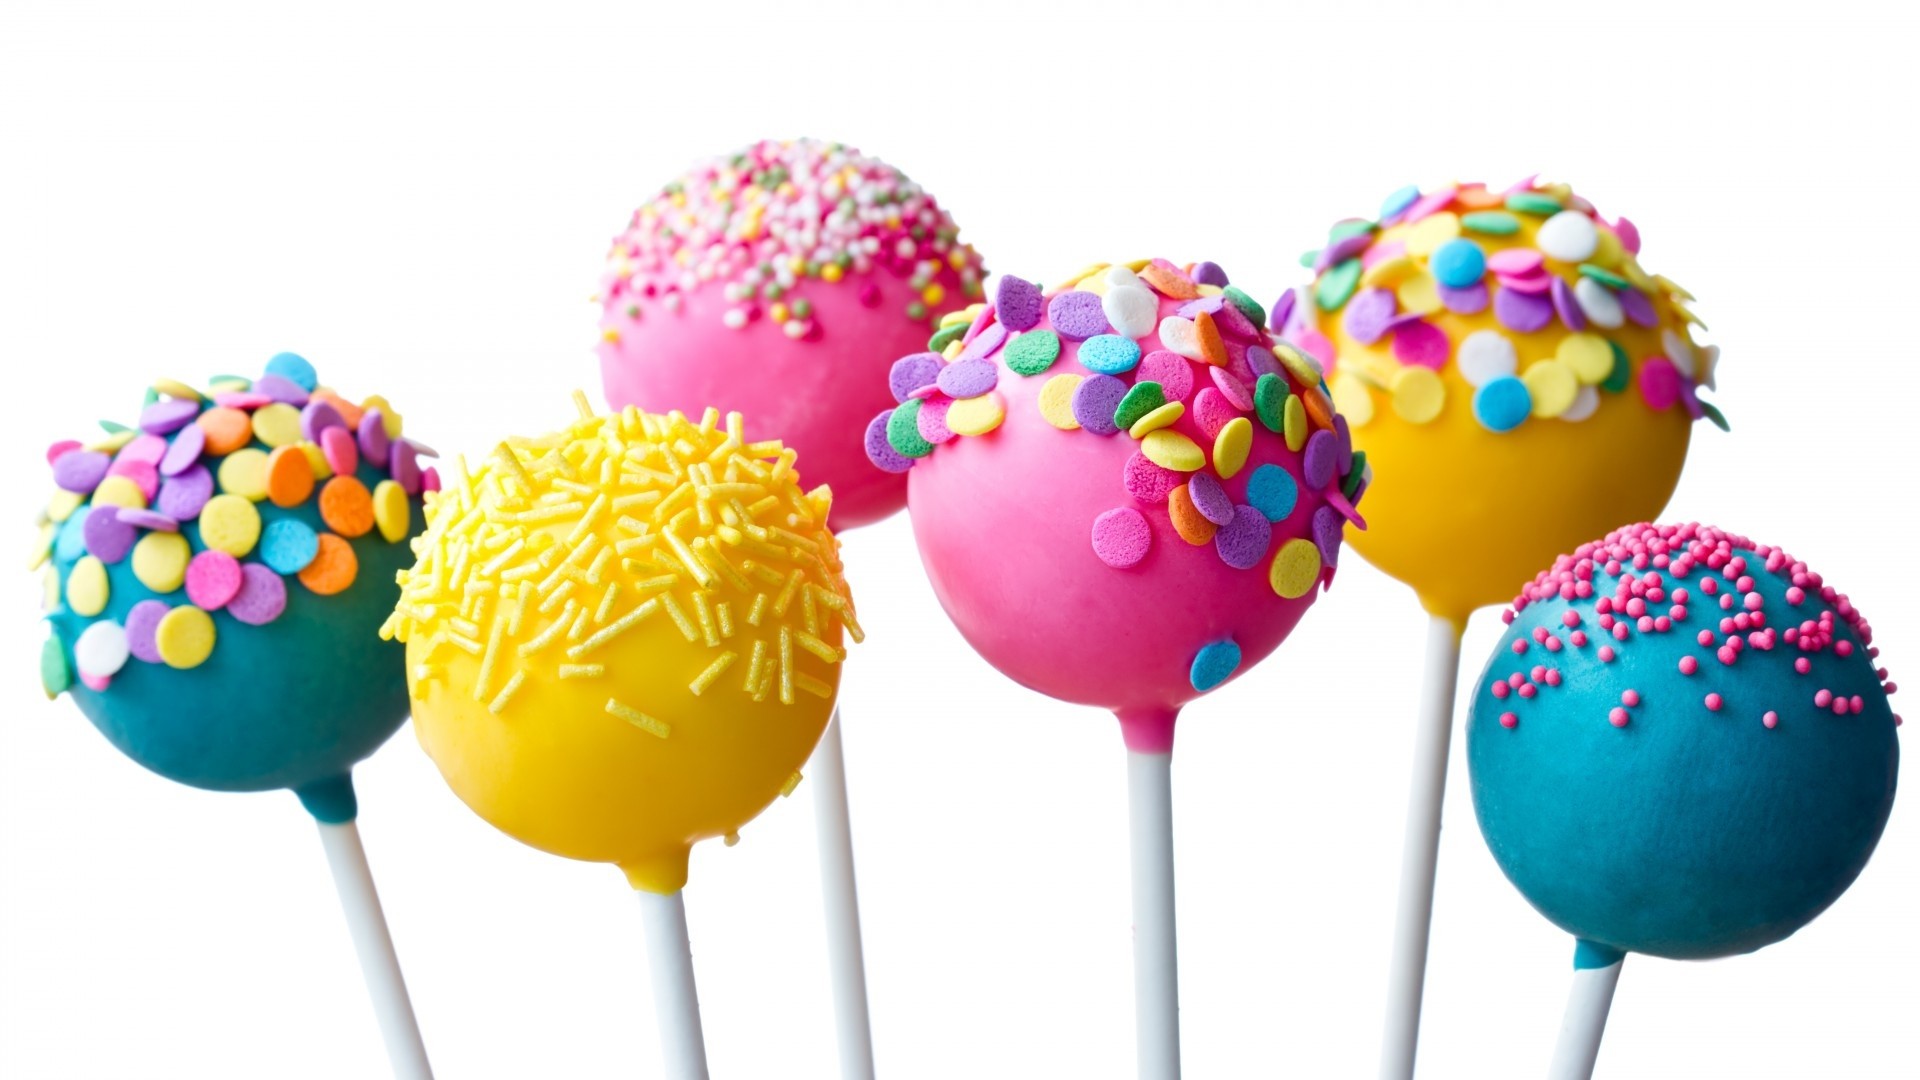 1920x1080  Wallpaper food, candy, sprinkling, frosting